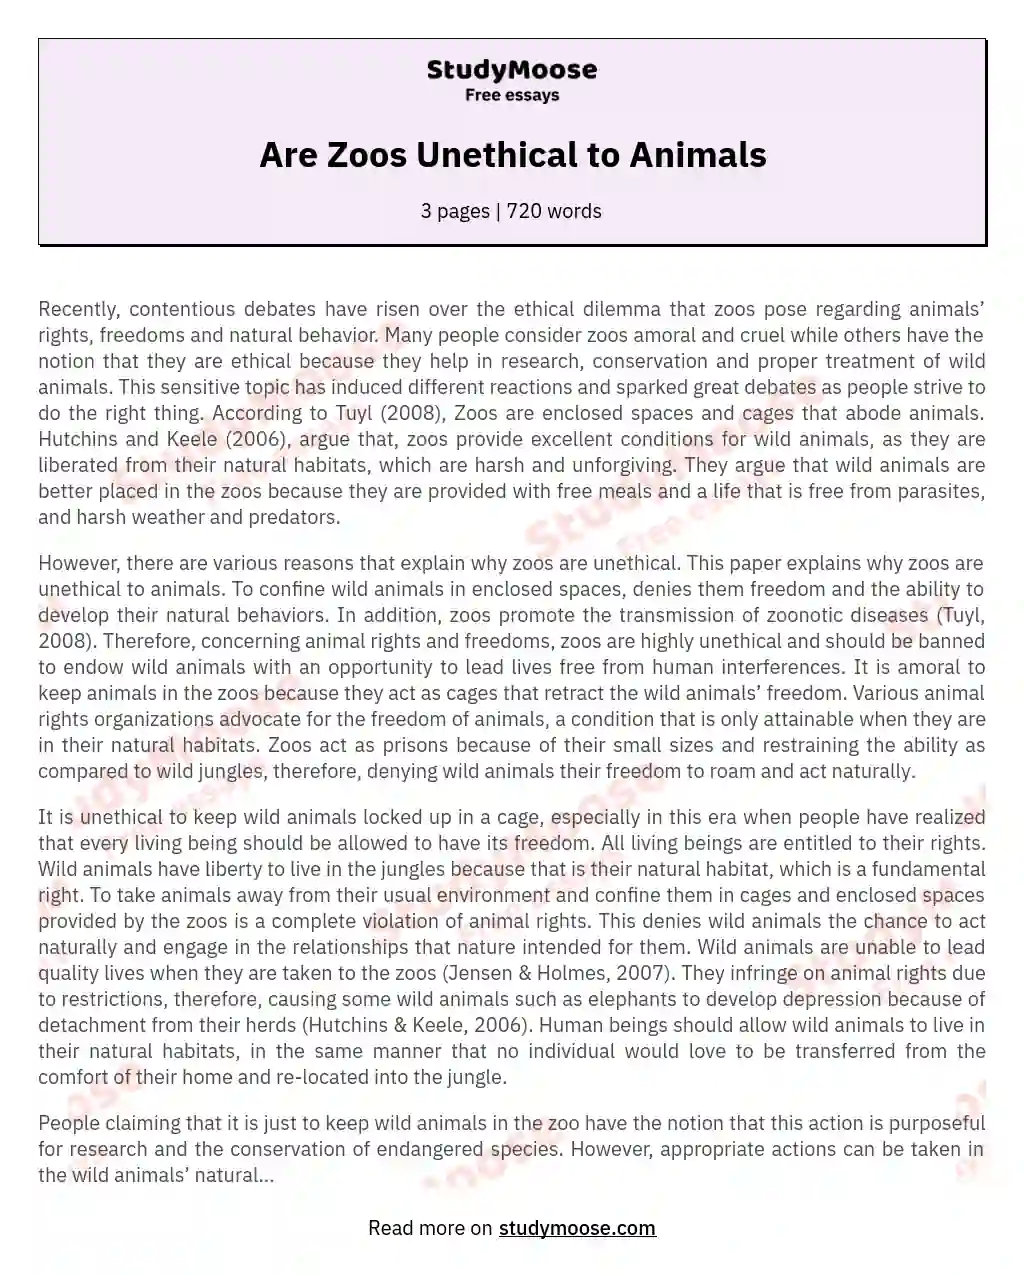 zoos are unethical essay